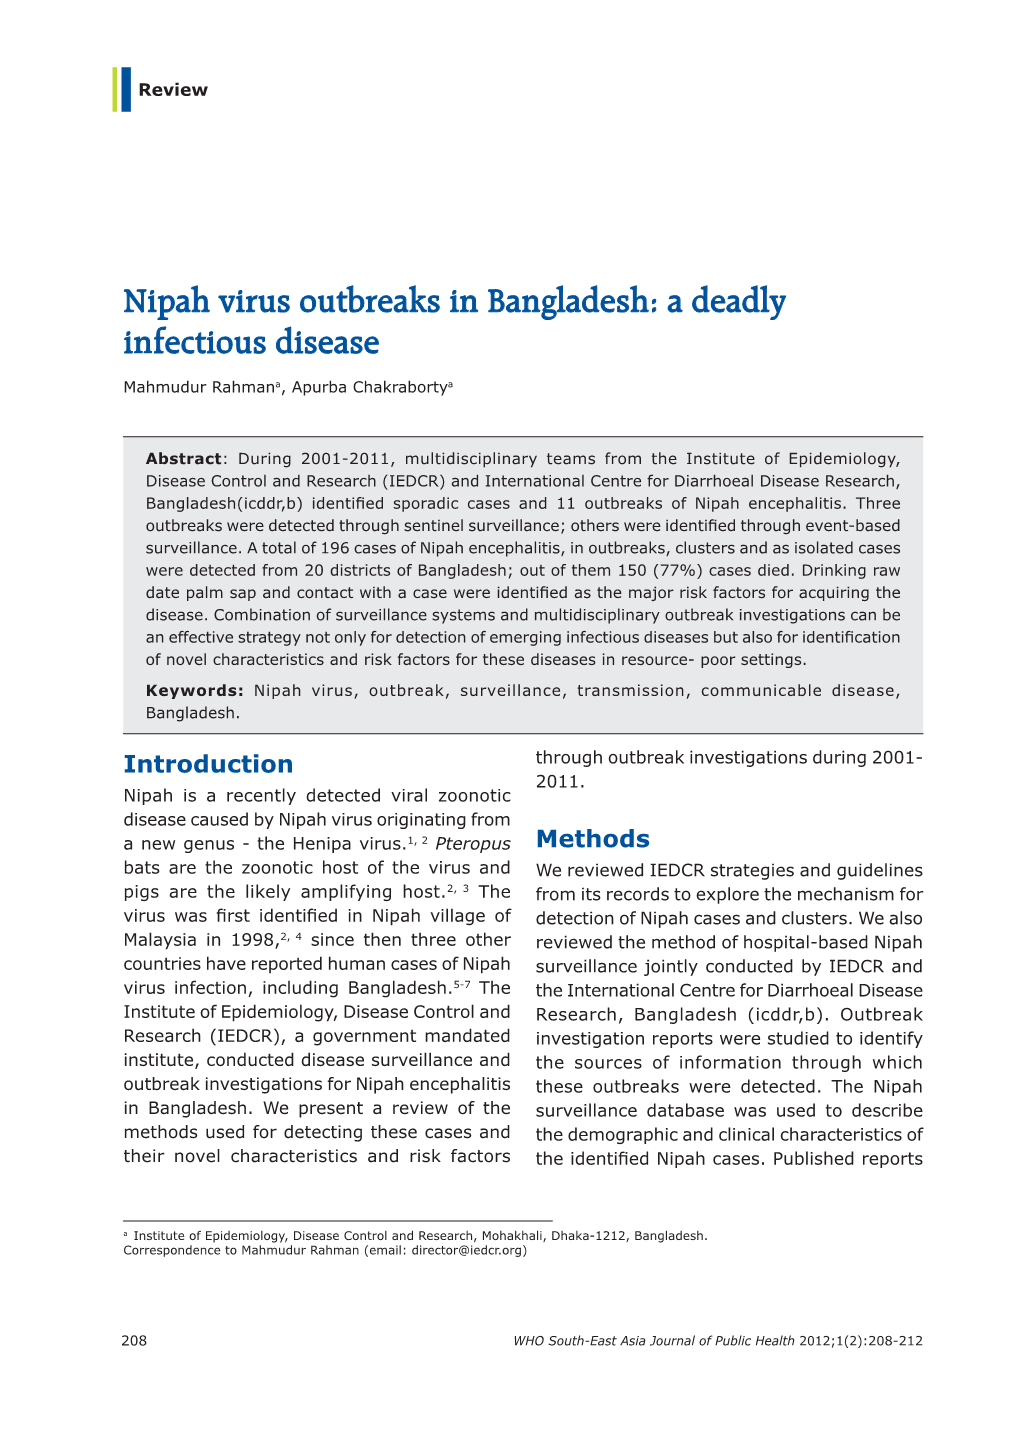 Nipah Virus Outbreaks in Bangladesh: a Deadly Infectious Disease